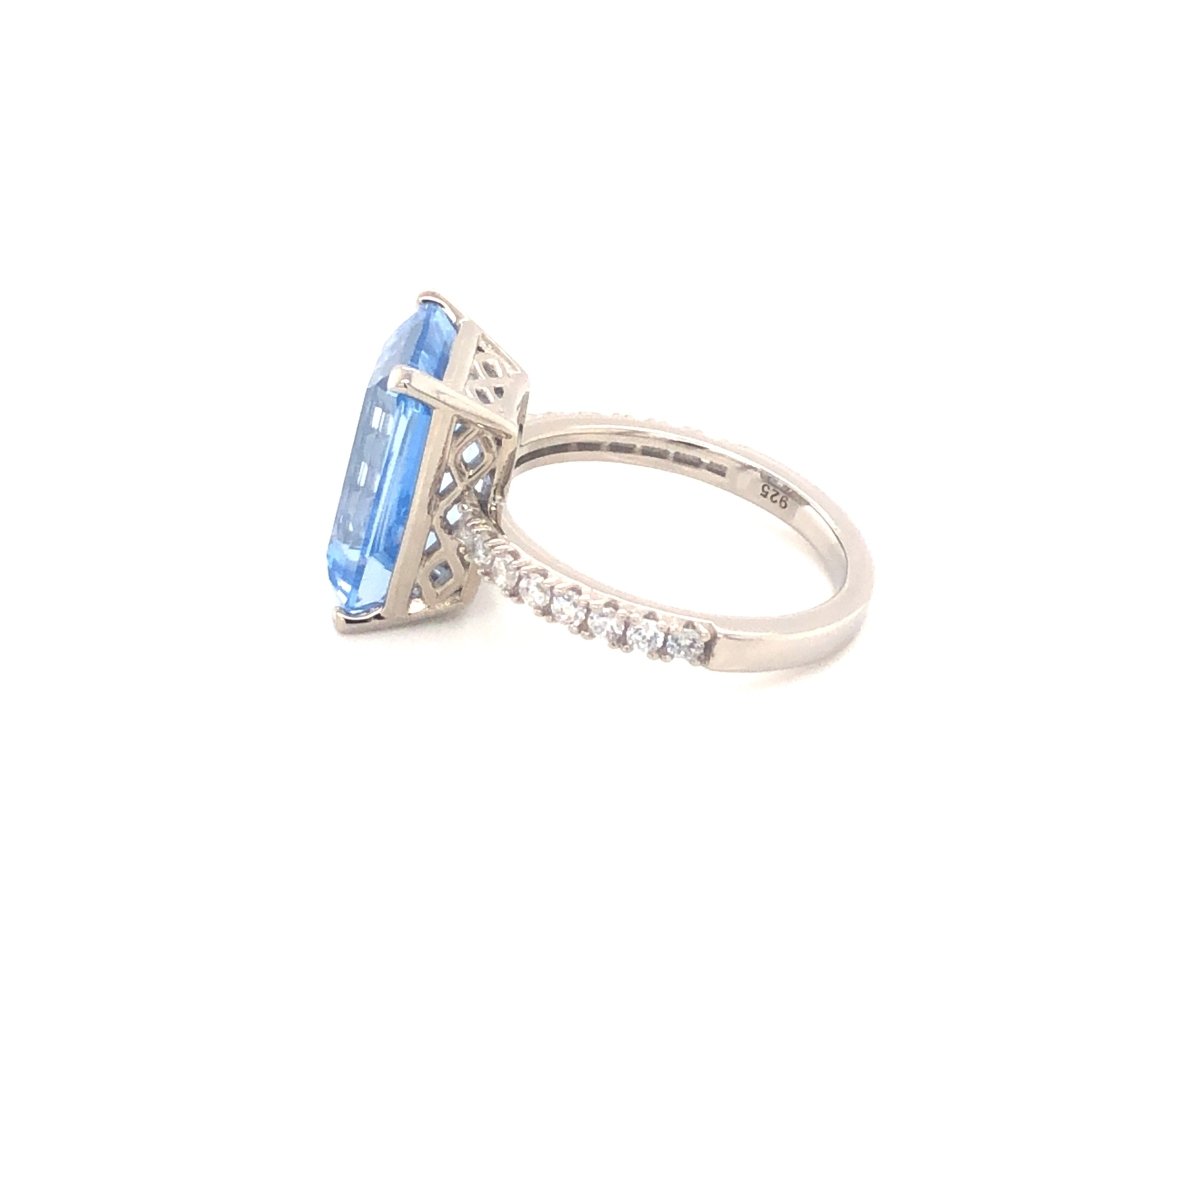 8.00ct Emerald Cut Blue Spinel &amp; Cubic Zirconia Ring Set in Rhodium Plated Silver